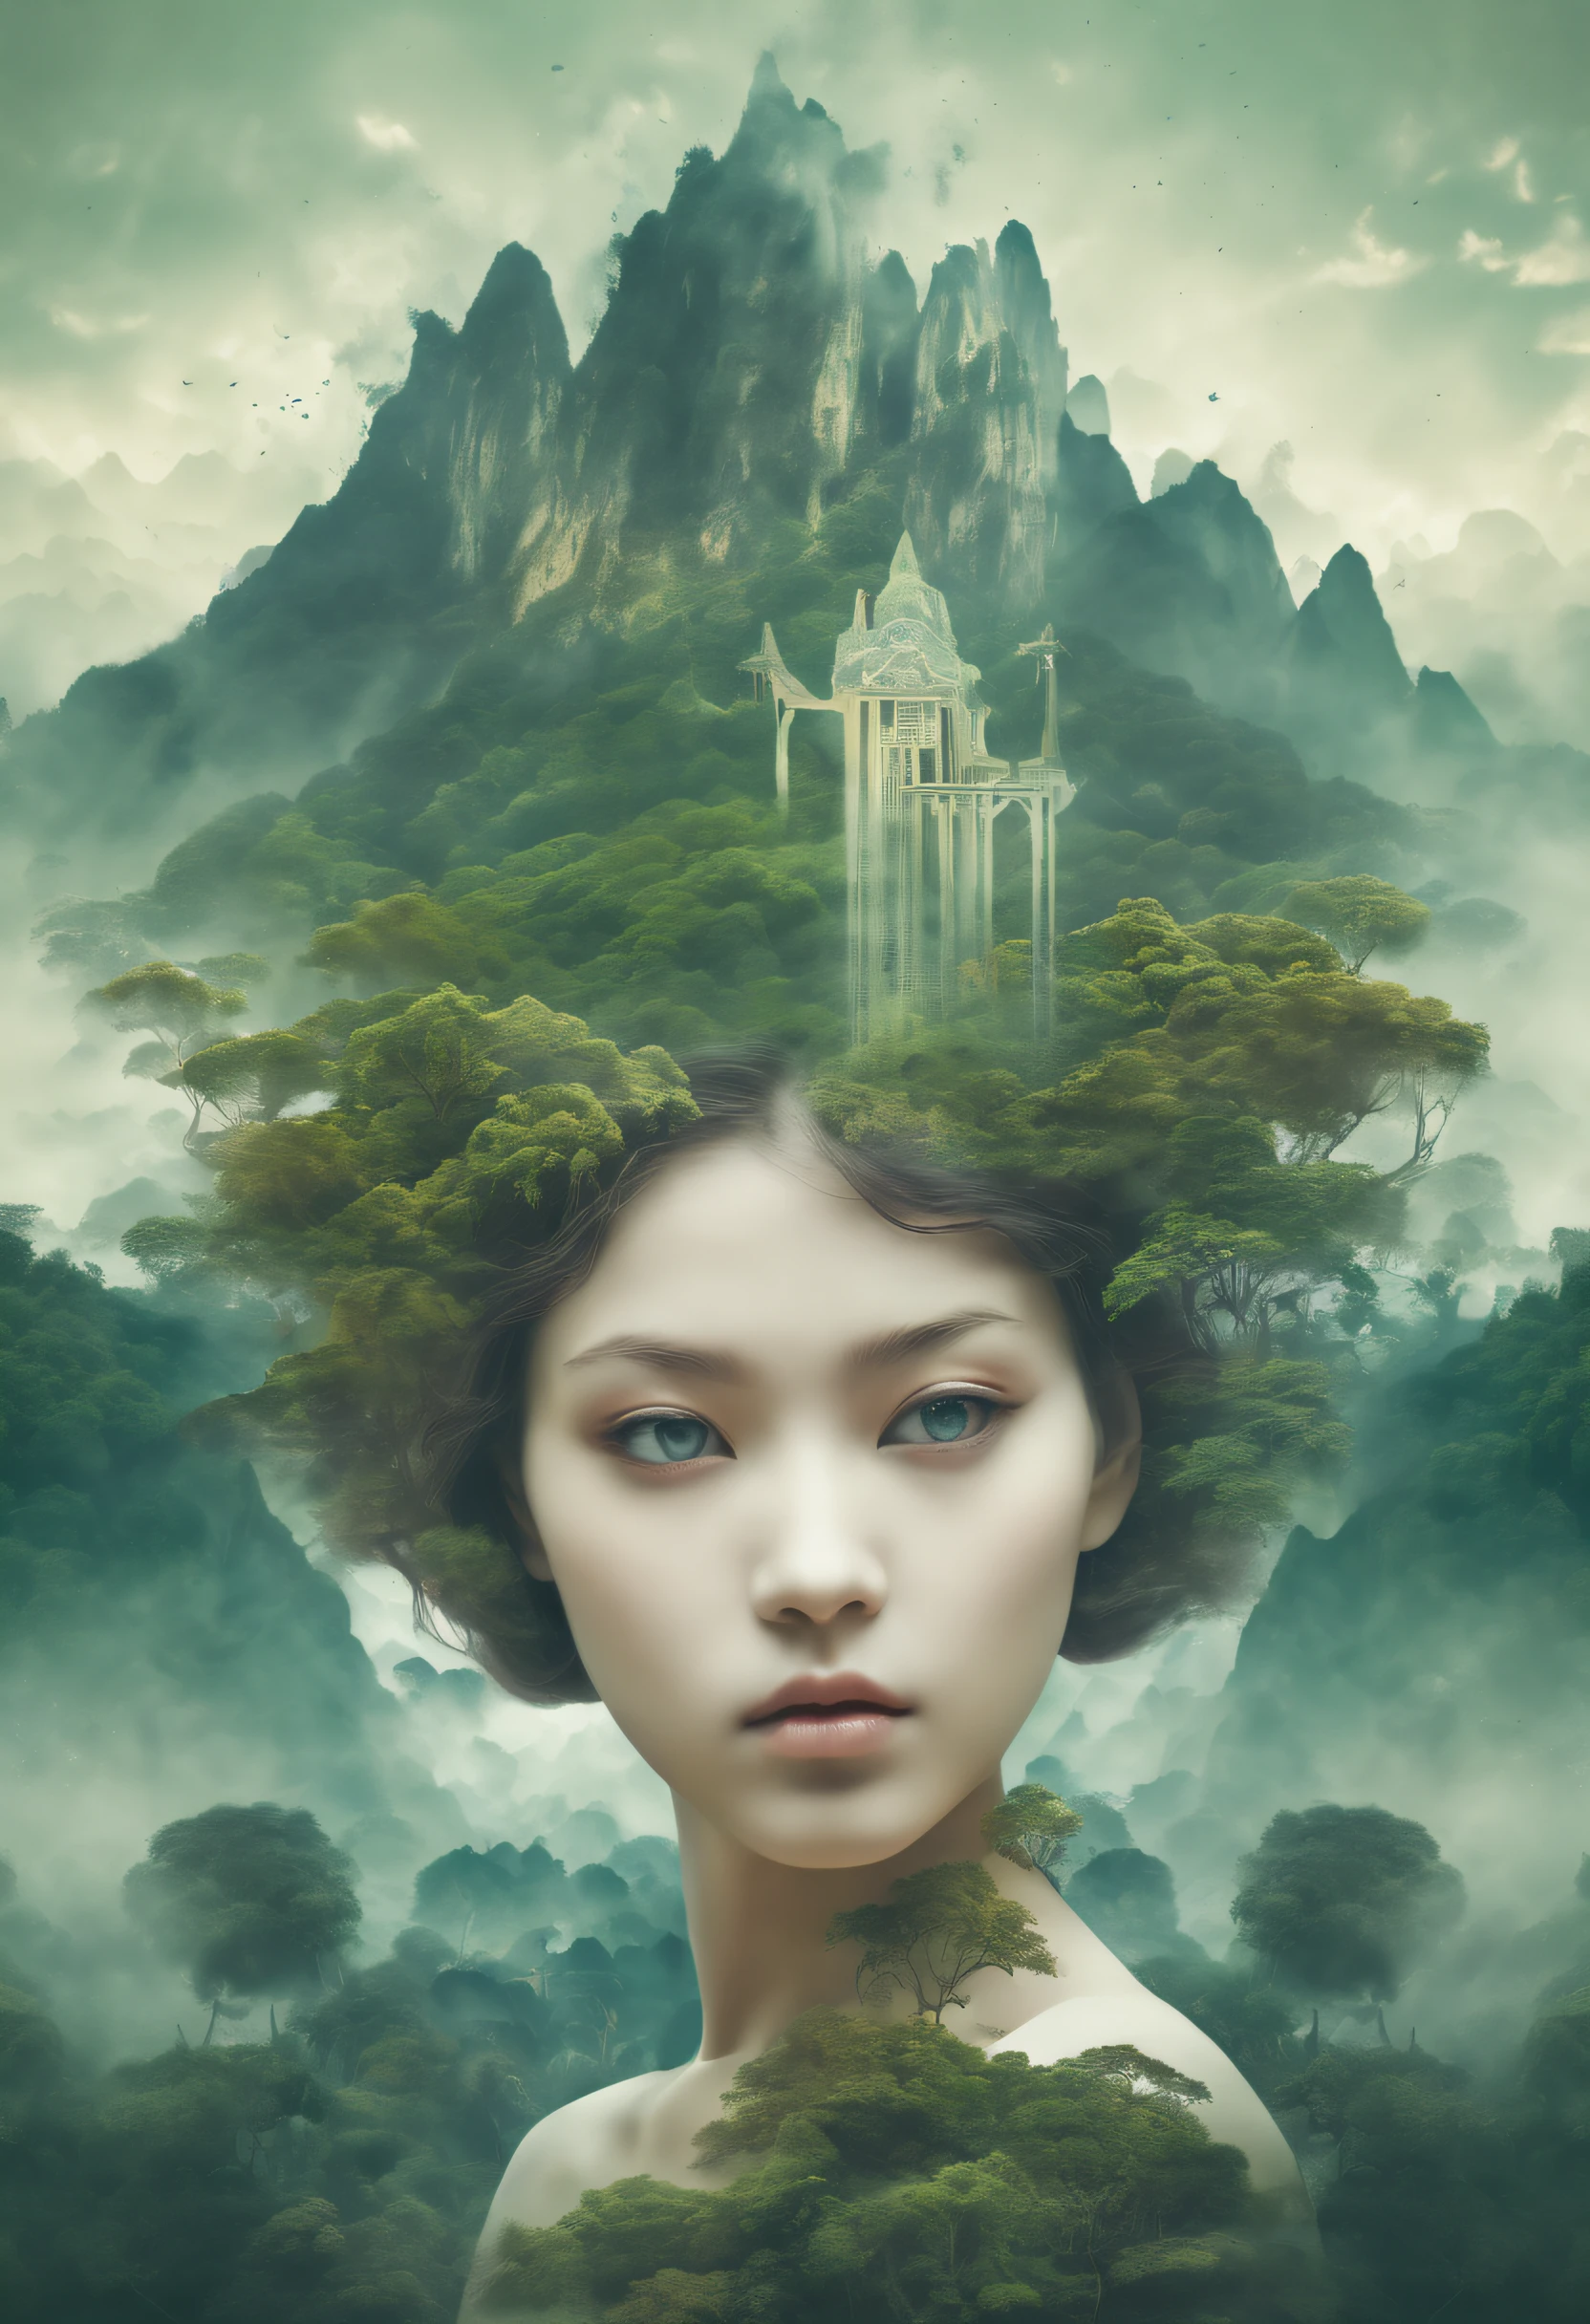 Dubrec style，Girl head portrait，Jungle mountains image foreground，（multiple exposure：1.8），Complex illustrations in surrealist art style，Surreal dreams